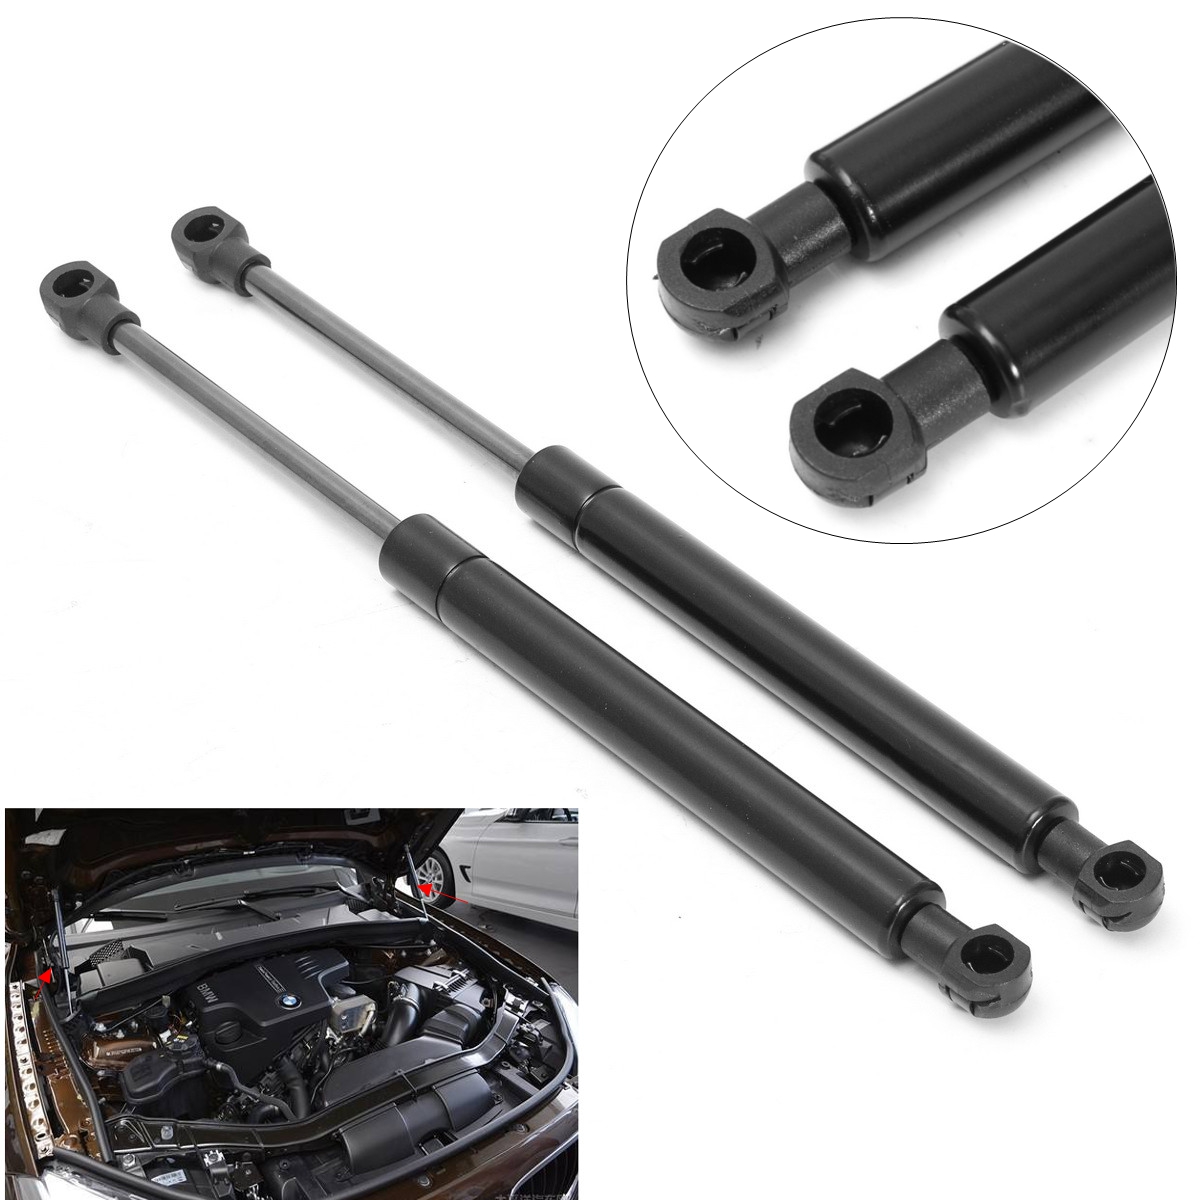 Qty 2 BOXI Front Hood Lift Supports Struts Shocks Springs Dampers For BMW Z8 2000-2003 Hood 6580 